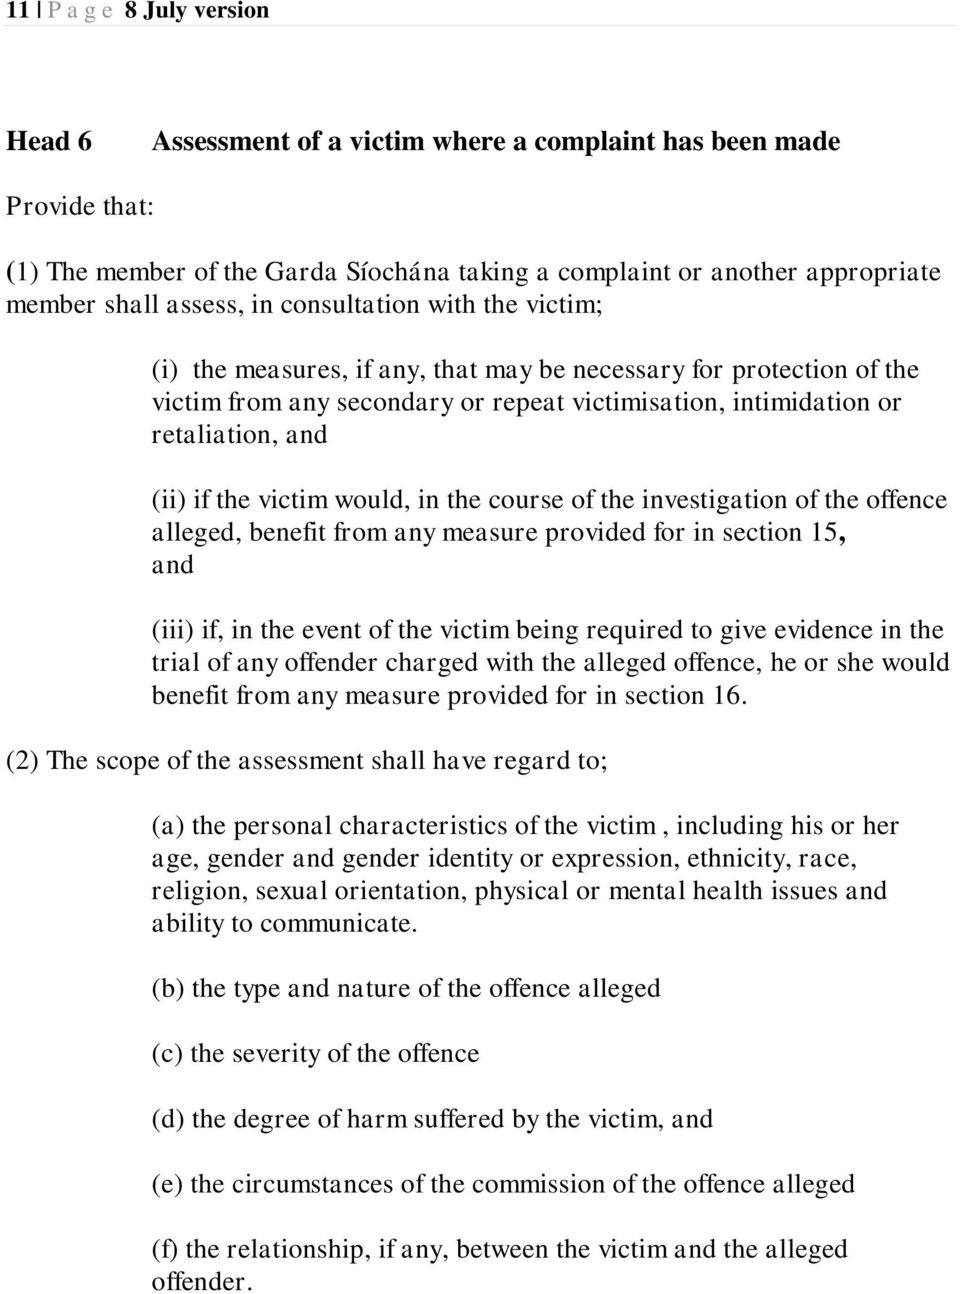 victim would, in the course of the investigation of the offence alleged, benefit from any measure provided for in section 15, and (iii) if, in the event of the victim being required to give evidence